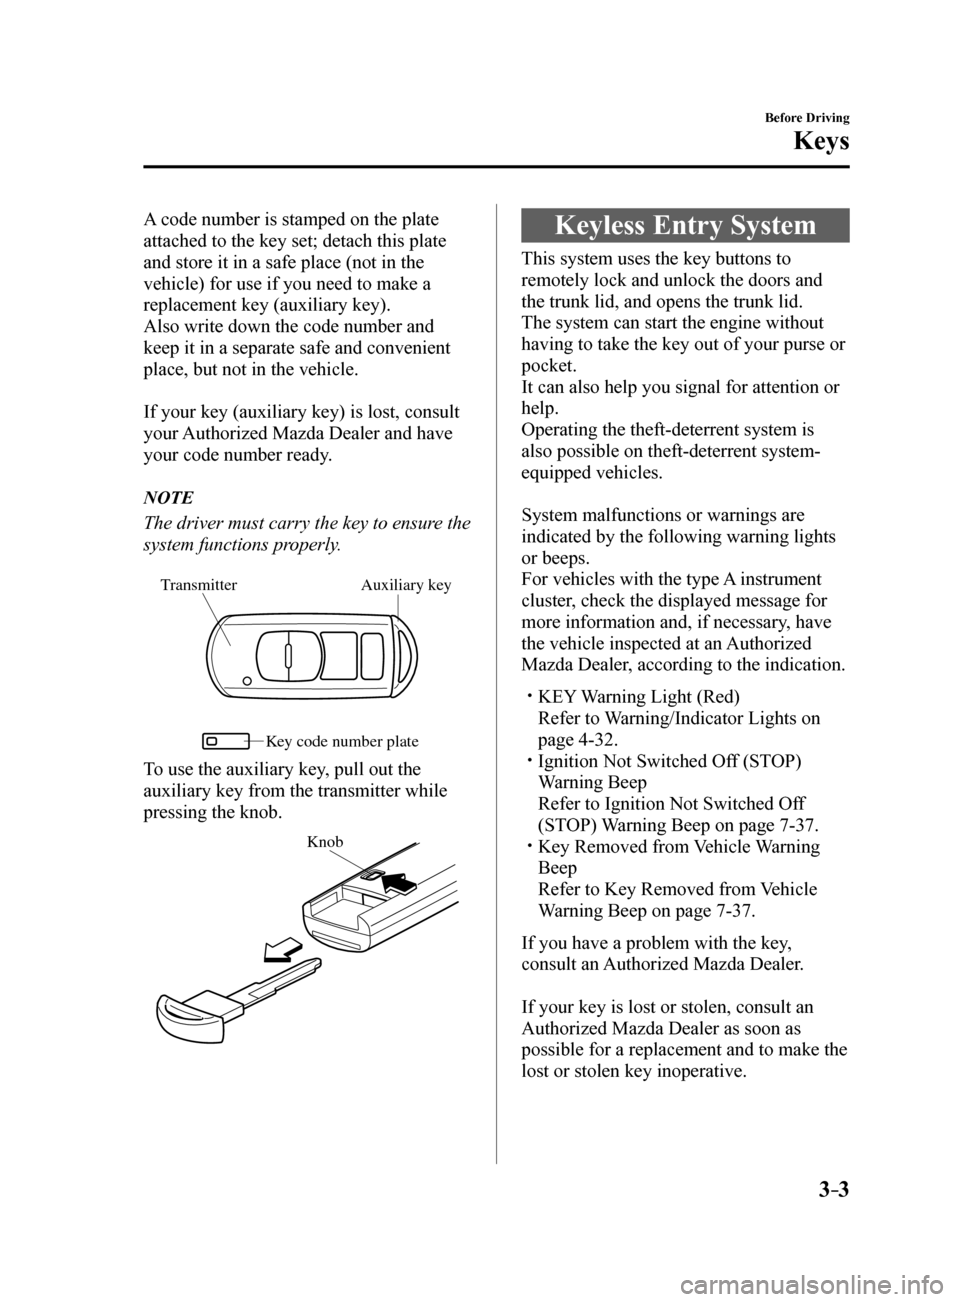 MAZDA MODEL 6 2017  Owners Manual (in English) 3–3
Before Driving
Keys
A code number is stamped on the plate 
attached to the key set; detach this plate 
and store it in a safe place (not in the 
vehicle) for use if you need to make a 
replaceme